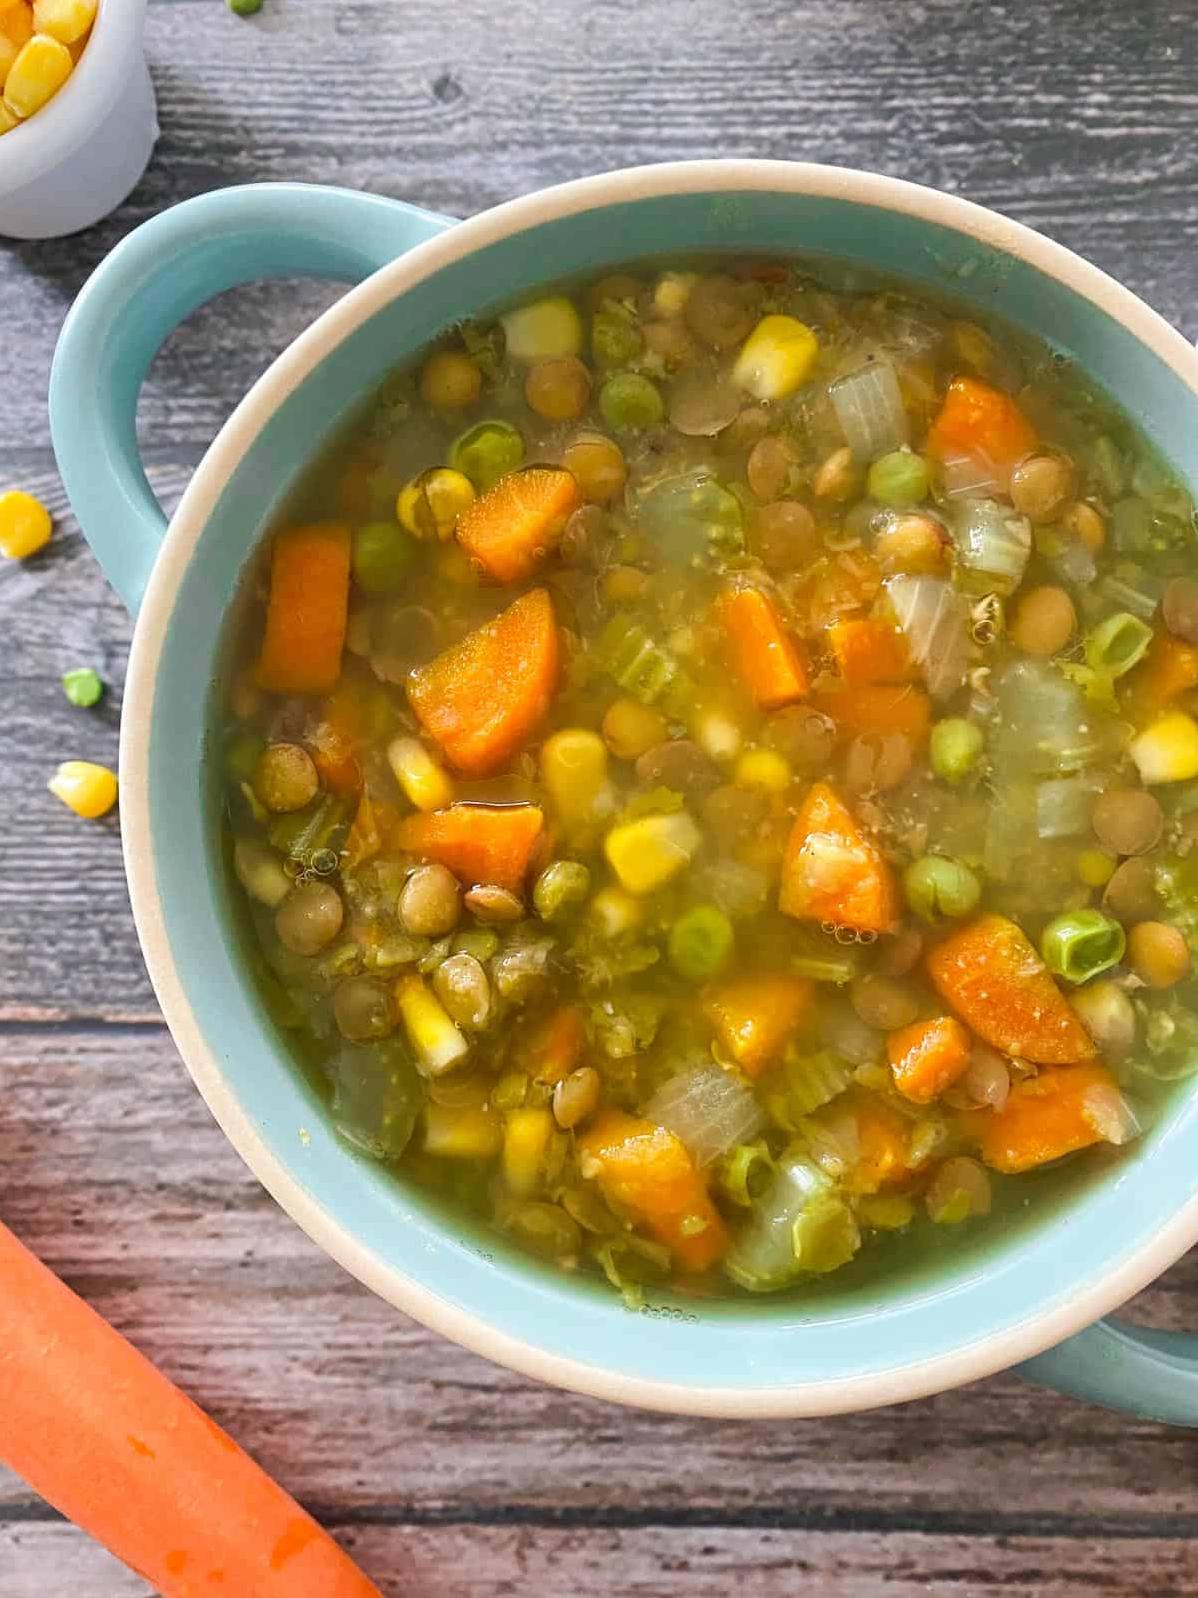  This soup is perfect for a cozy night in